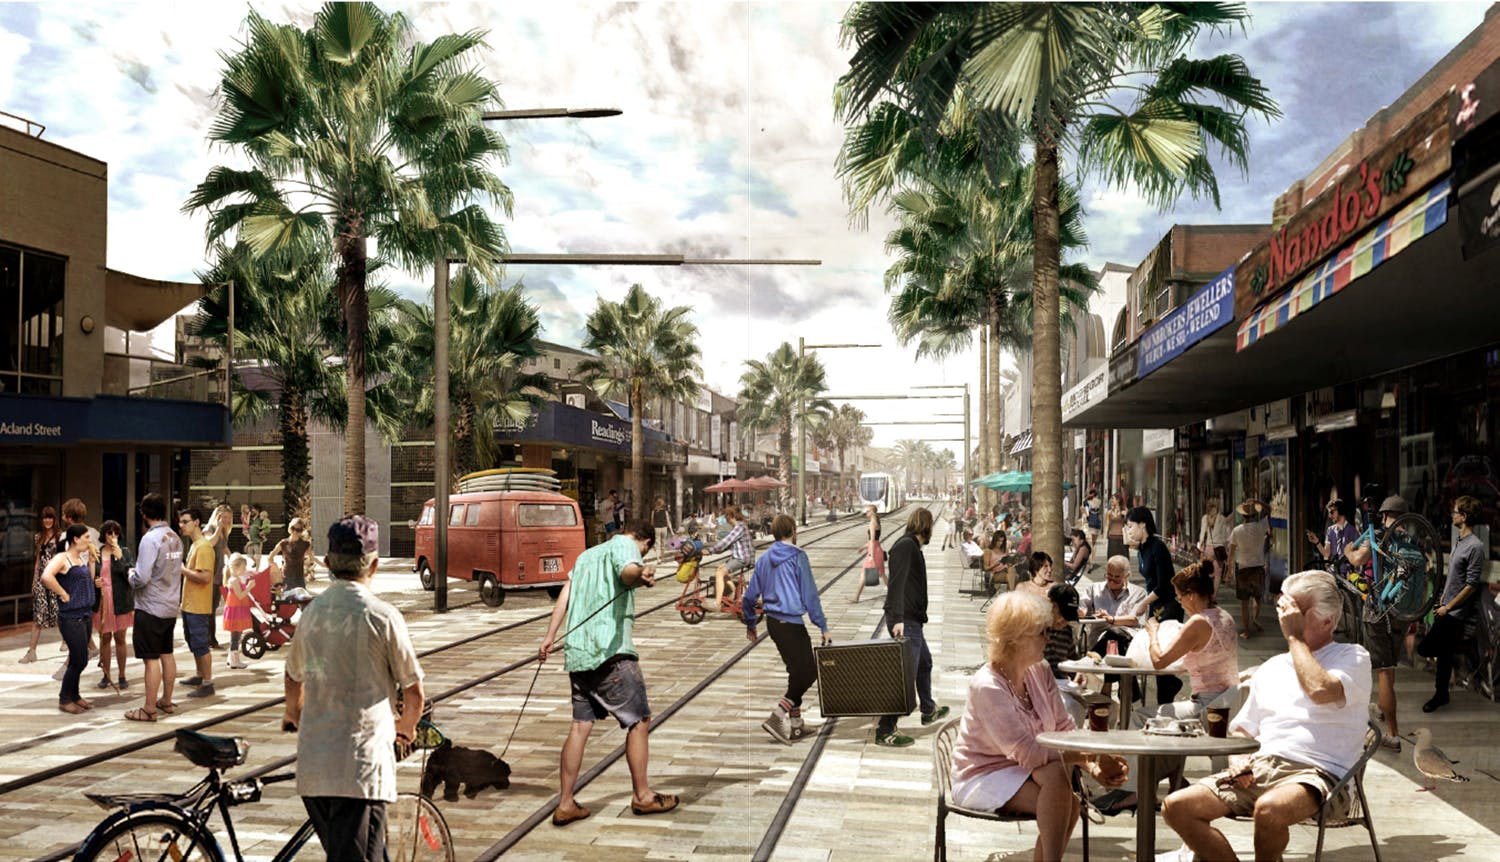 An artists render of the Acland Street tram terminus.